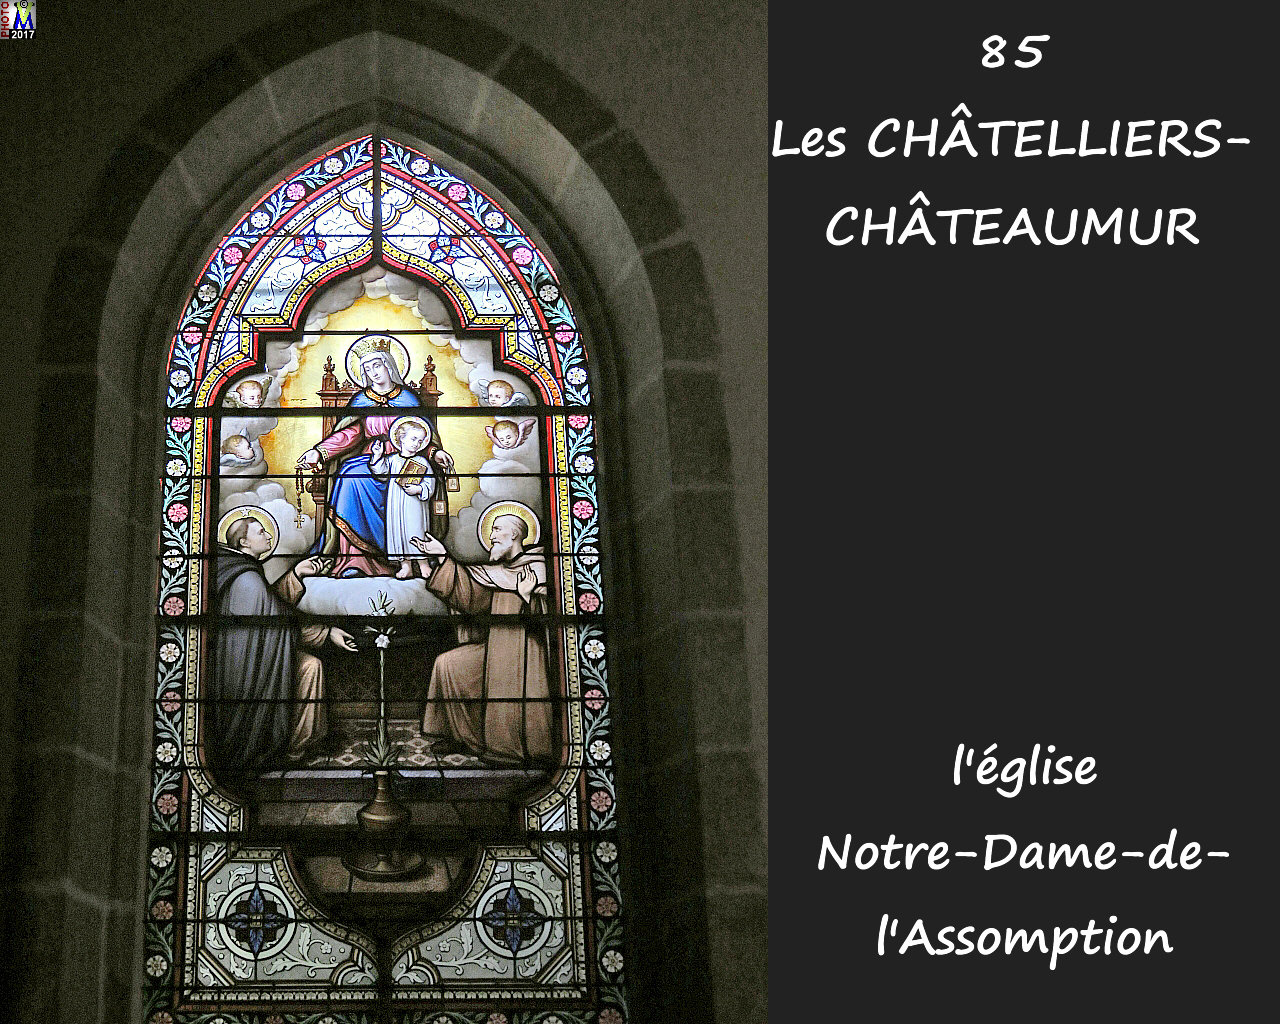 85CHATELLIERS-CHATEAUMUR_eglise_1110.jpg